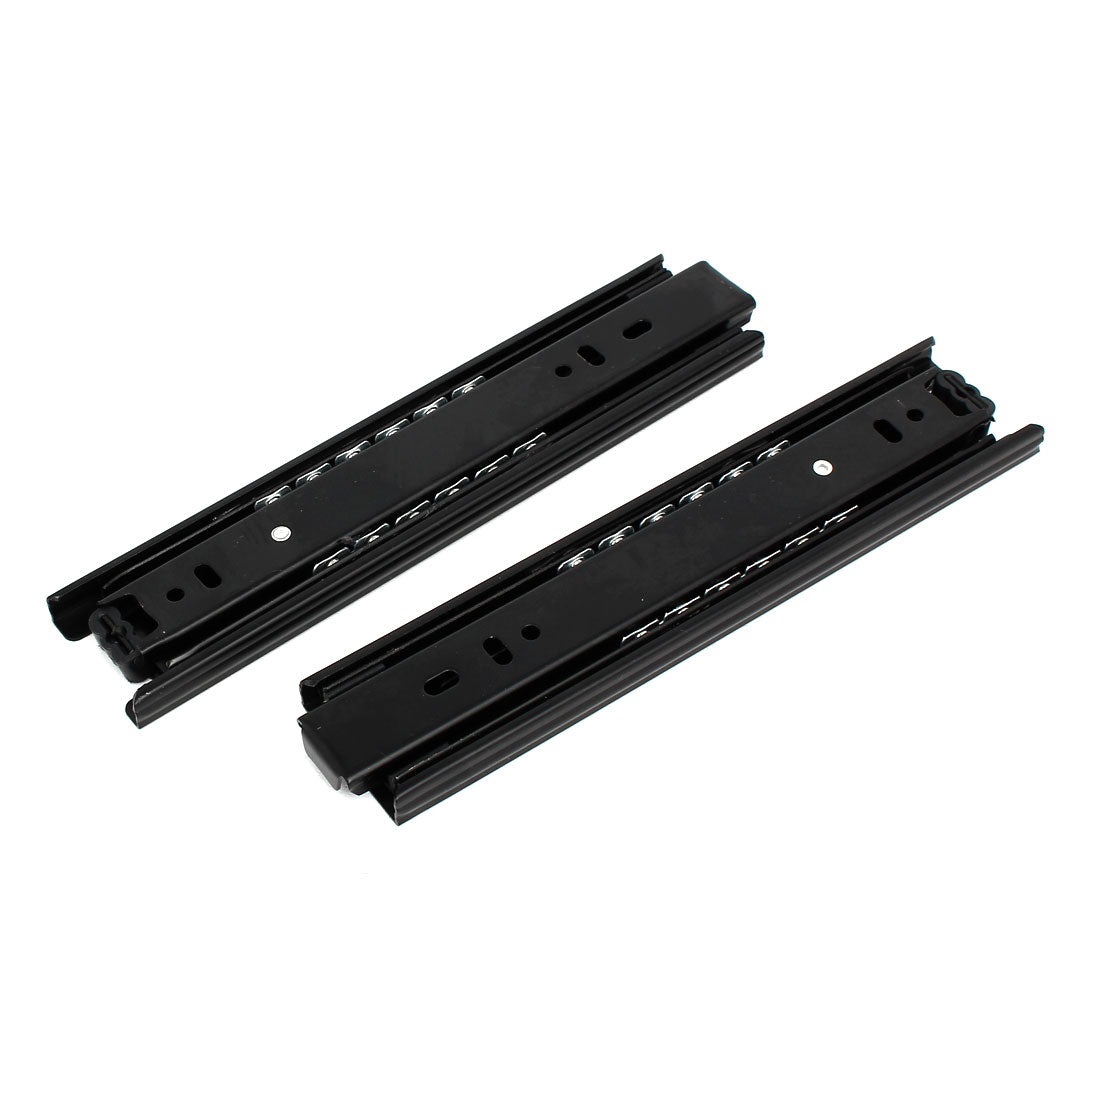 uxcell Uxcell 8'' Length 3-Section Ball Bearing Full Extension Drawer Slides Track Black 2pcs